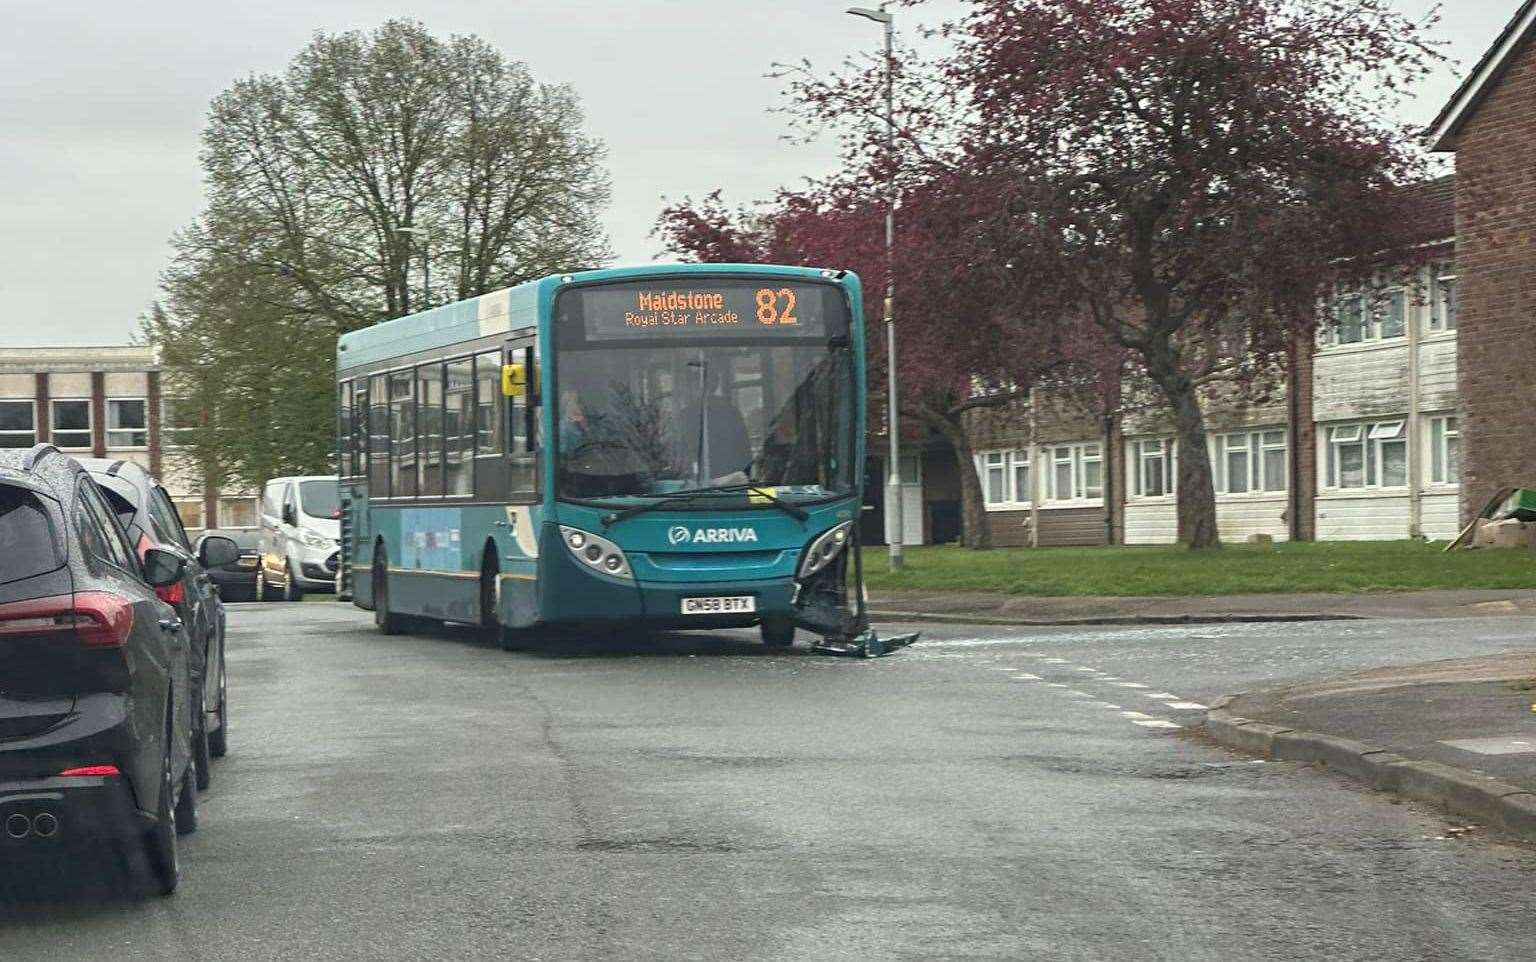 An Arriva bus can be seen with its side smashed. Picture: Chloe Powell